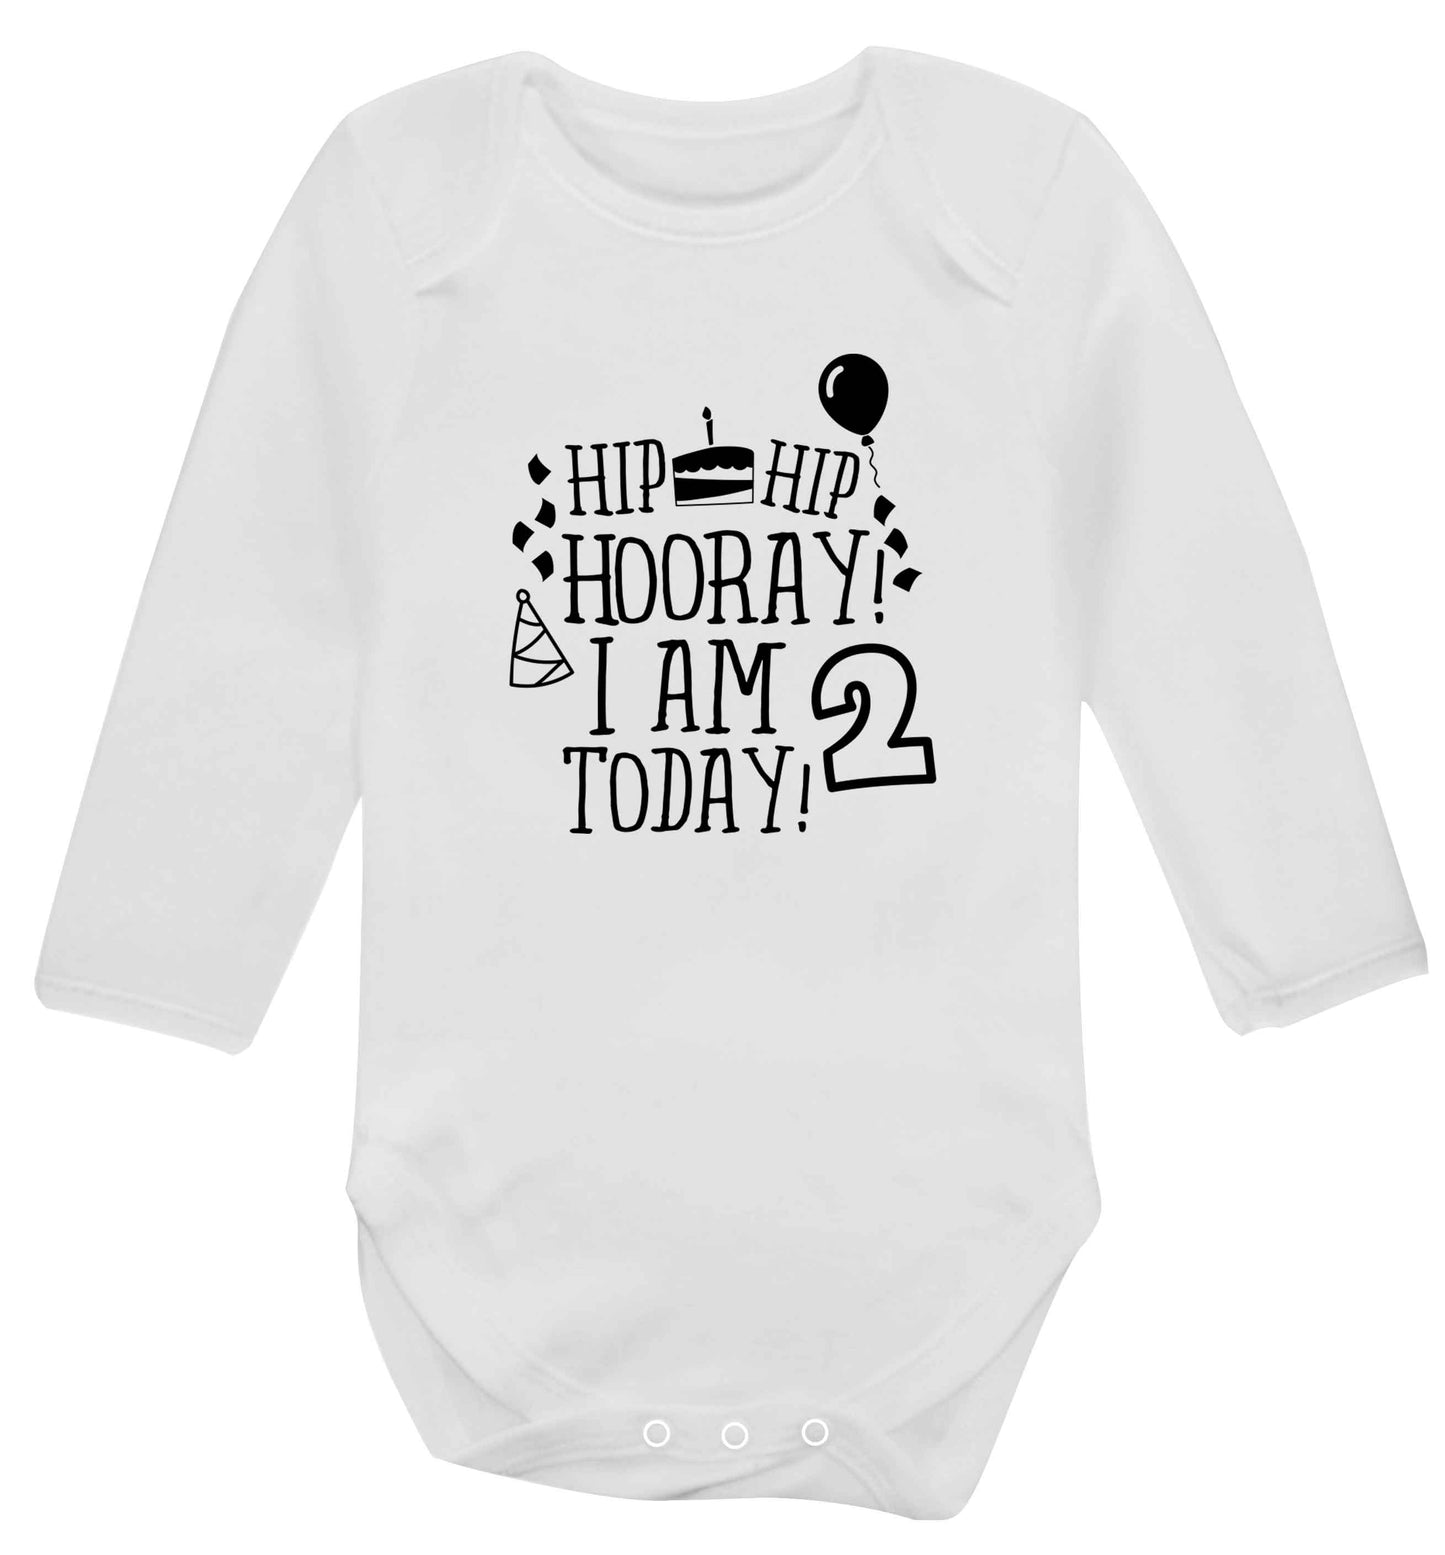 I'm 2 Today baby vest long sleeved white 6-12 months